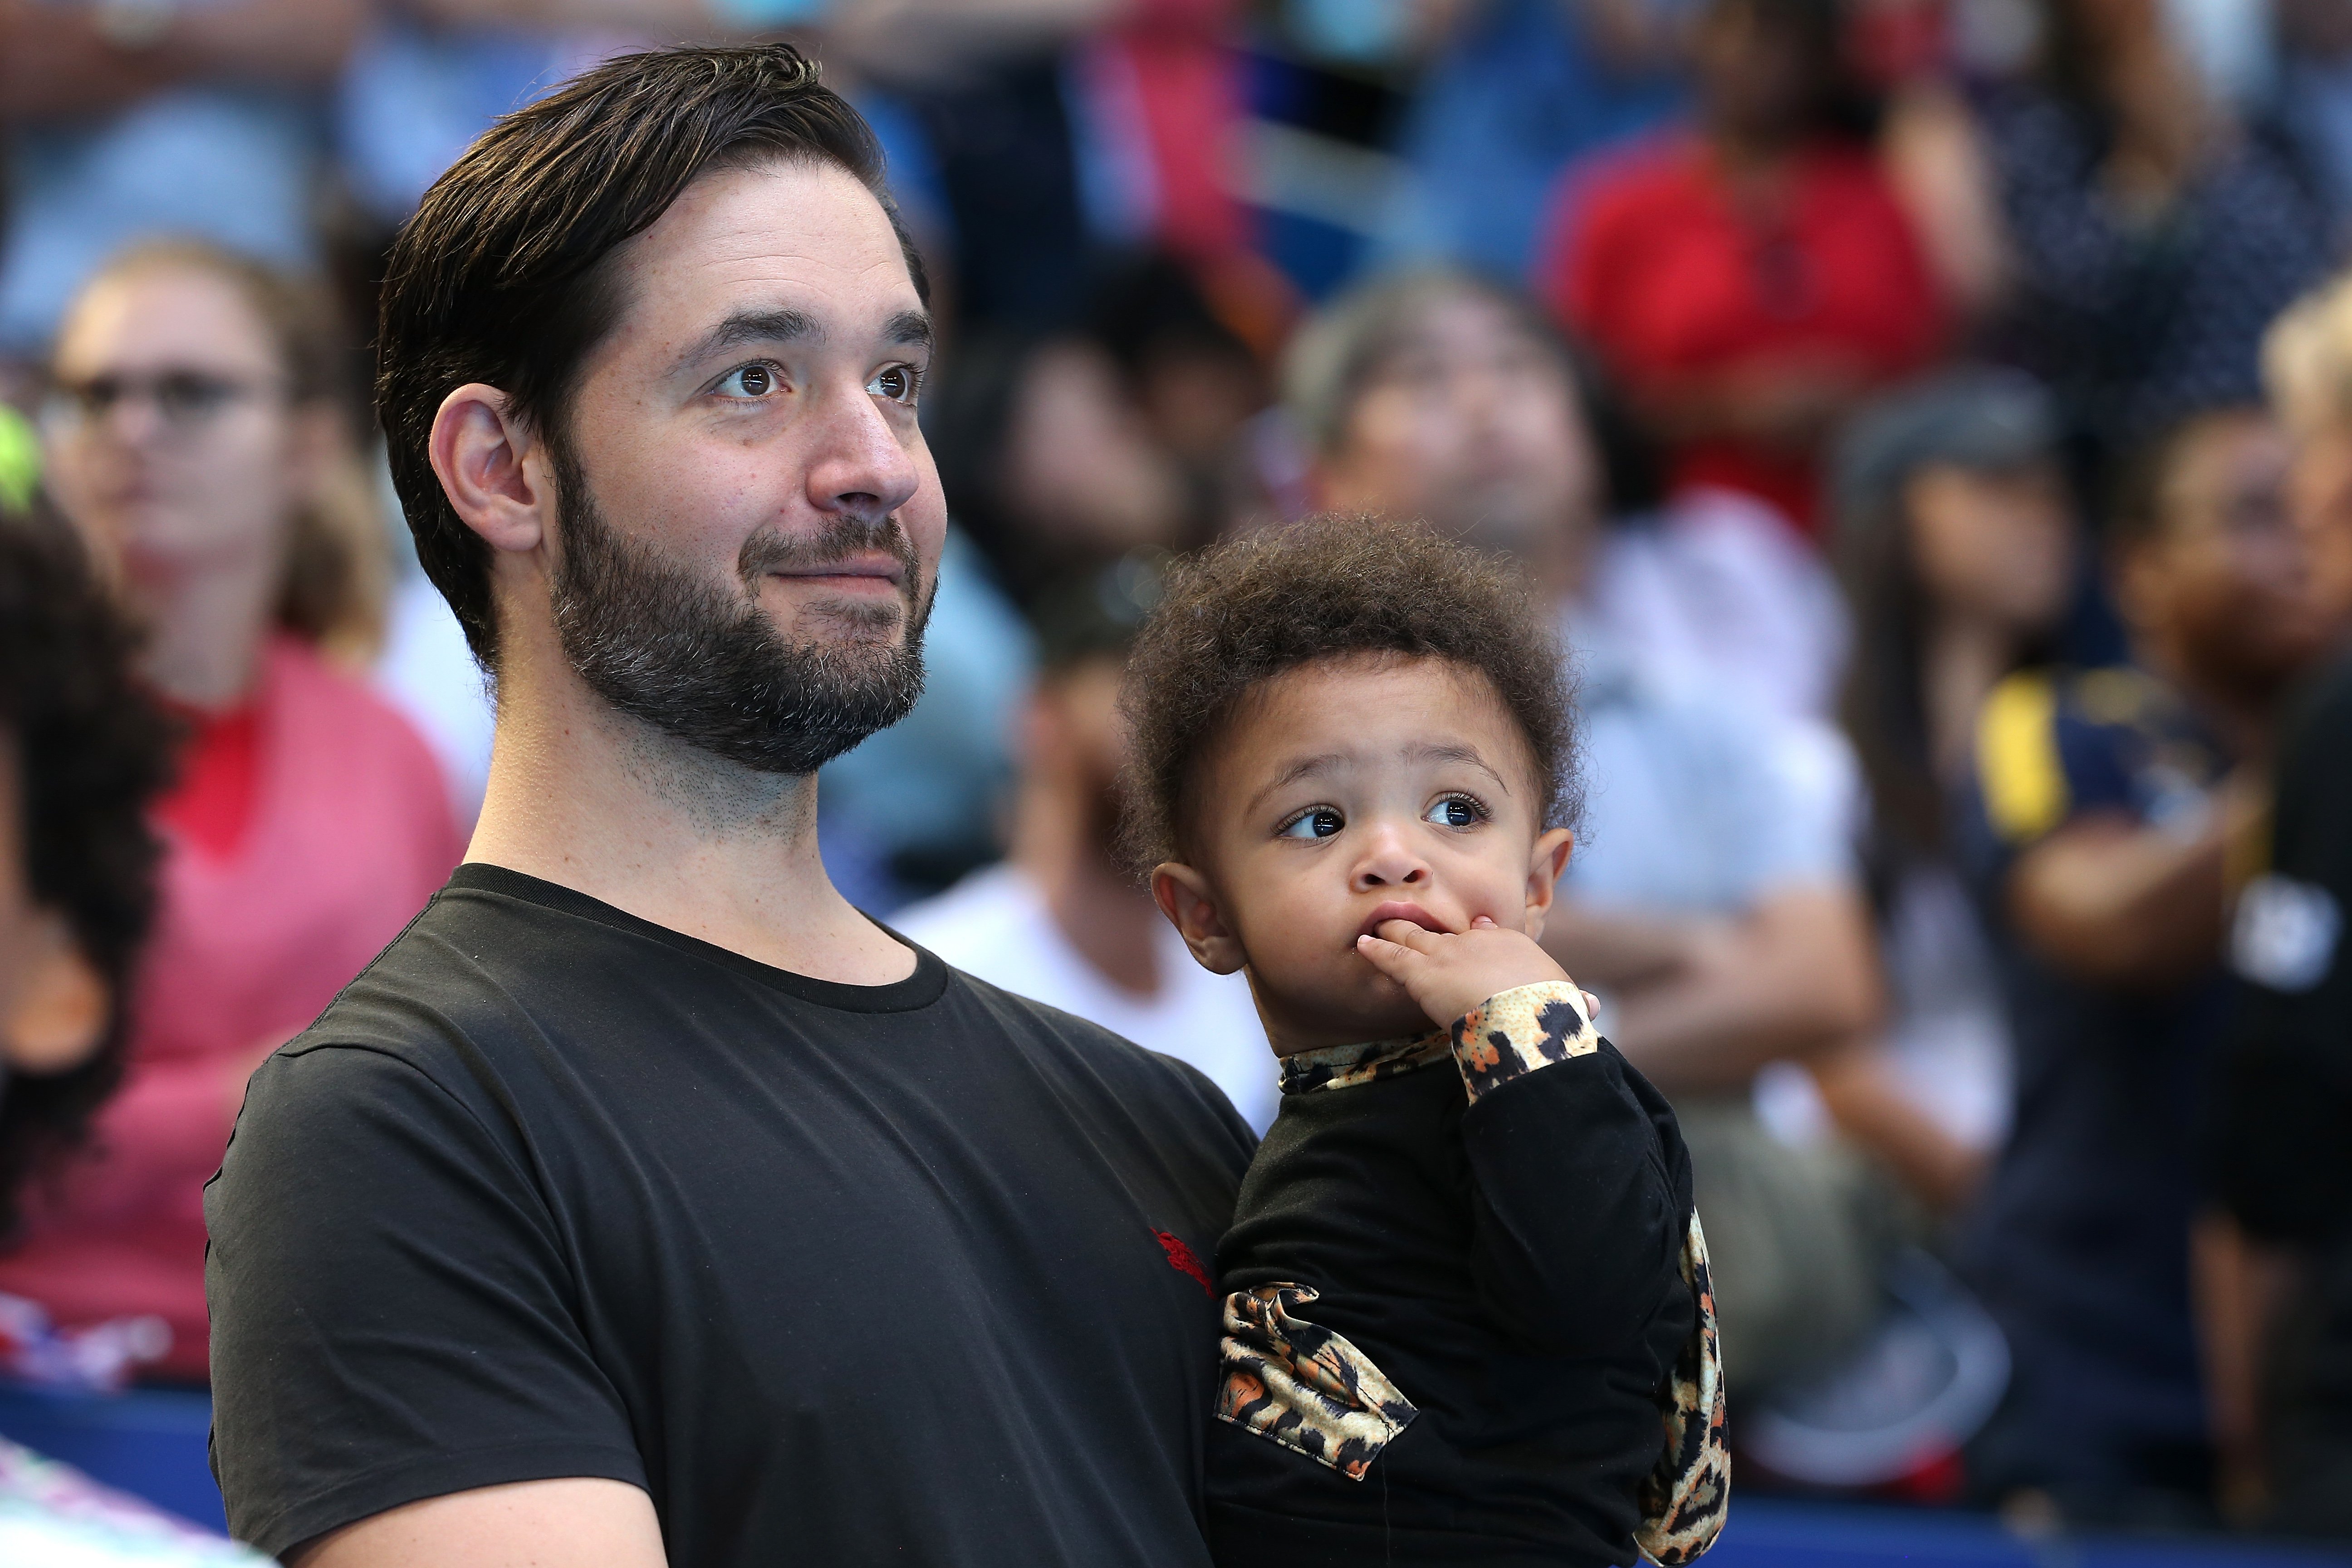 Alexis Ohanian & Olympia Ohanian watch Serena Williams during the 2019 Hopman Cup on Jan. 03, 2019 in Perth, Australia. | Photo: Getty Images